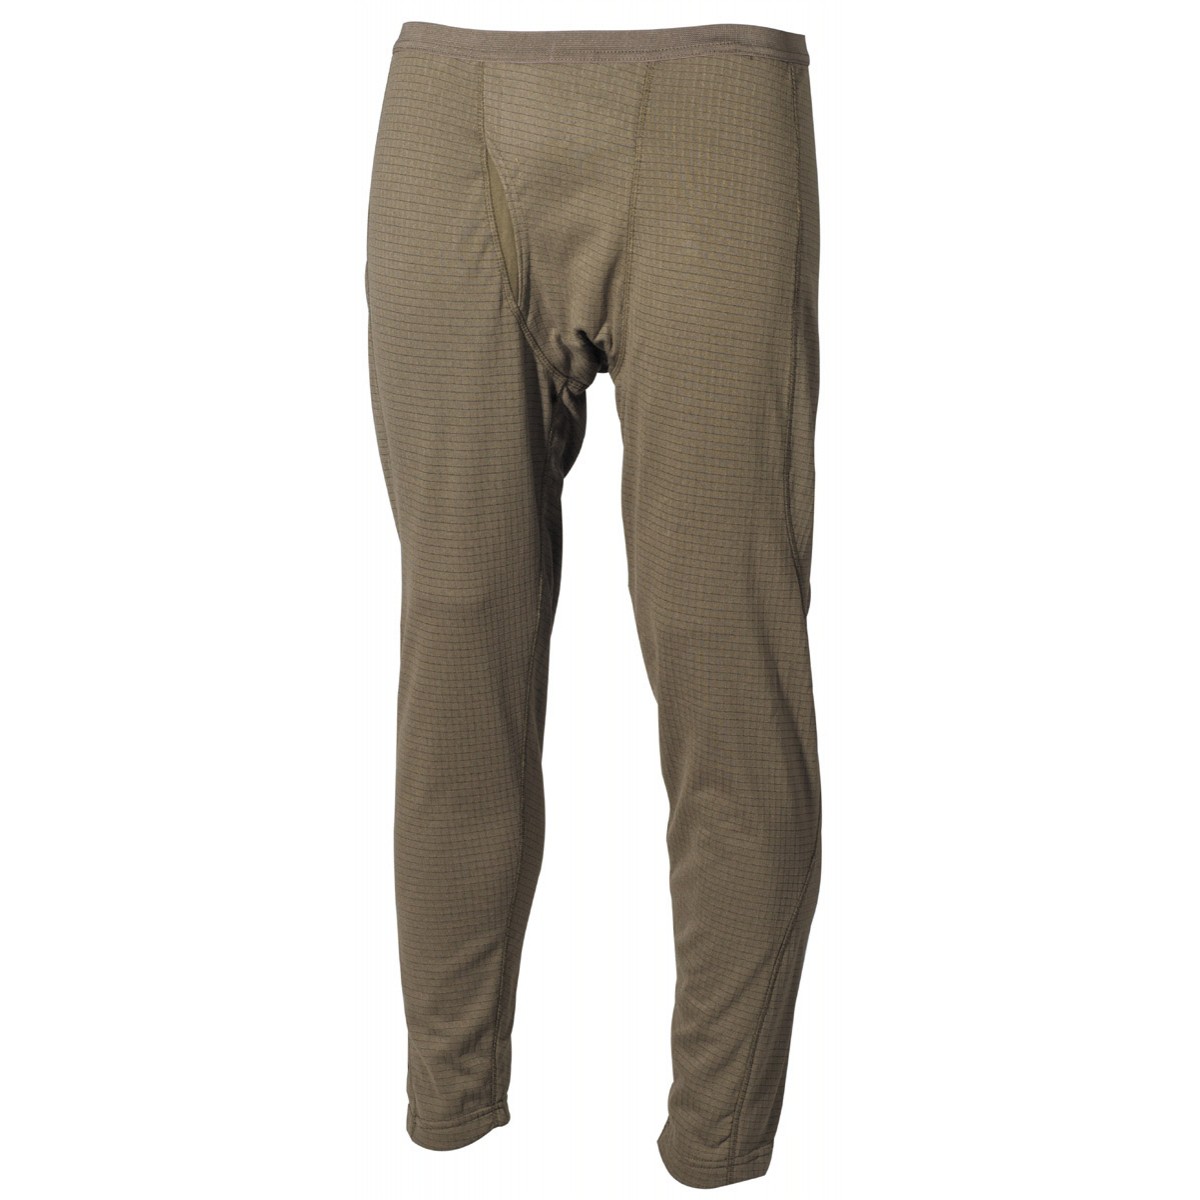 Military/Outdoor Underpants Level 2 Gen.3 Breathable Moisture Control - OD Green